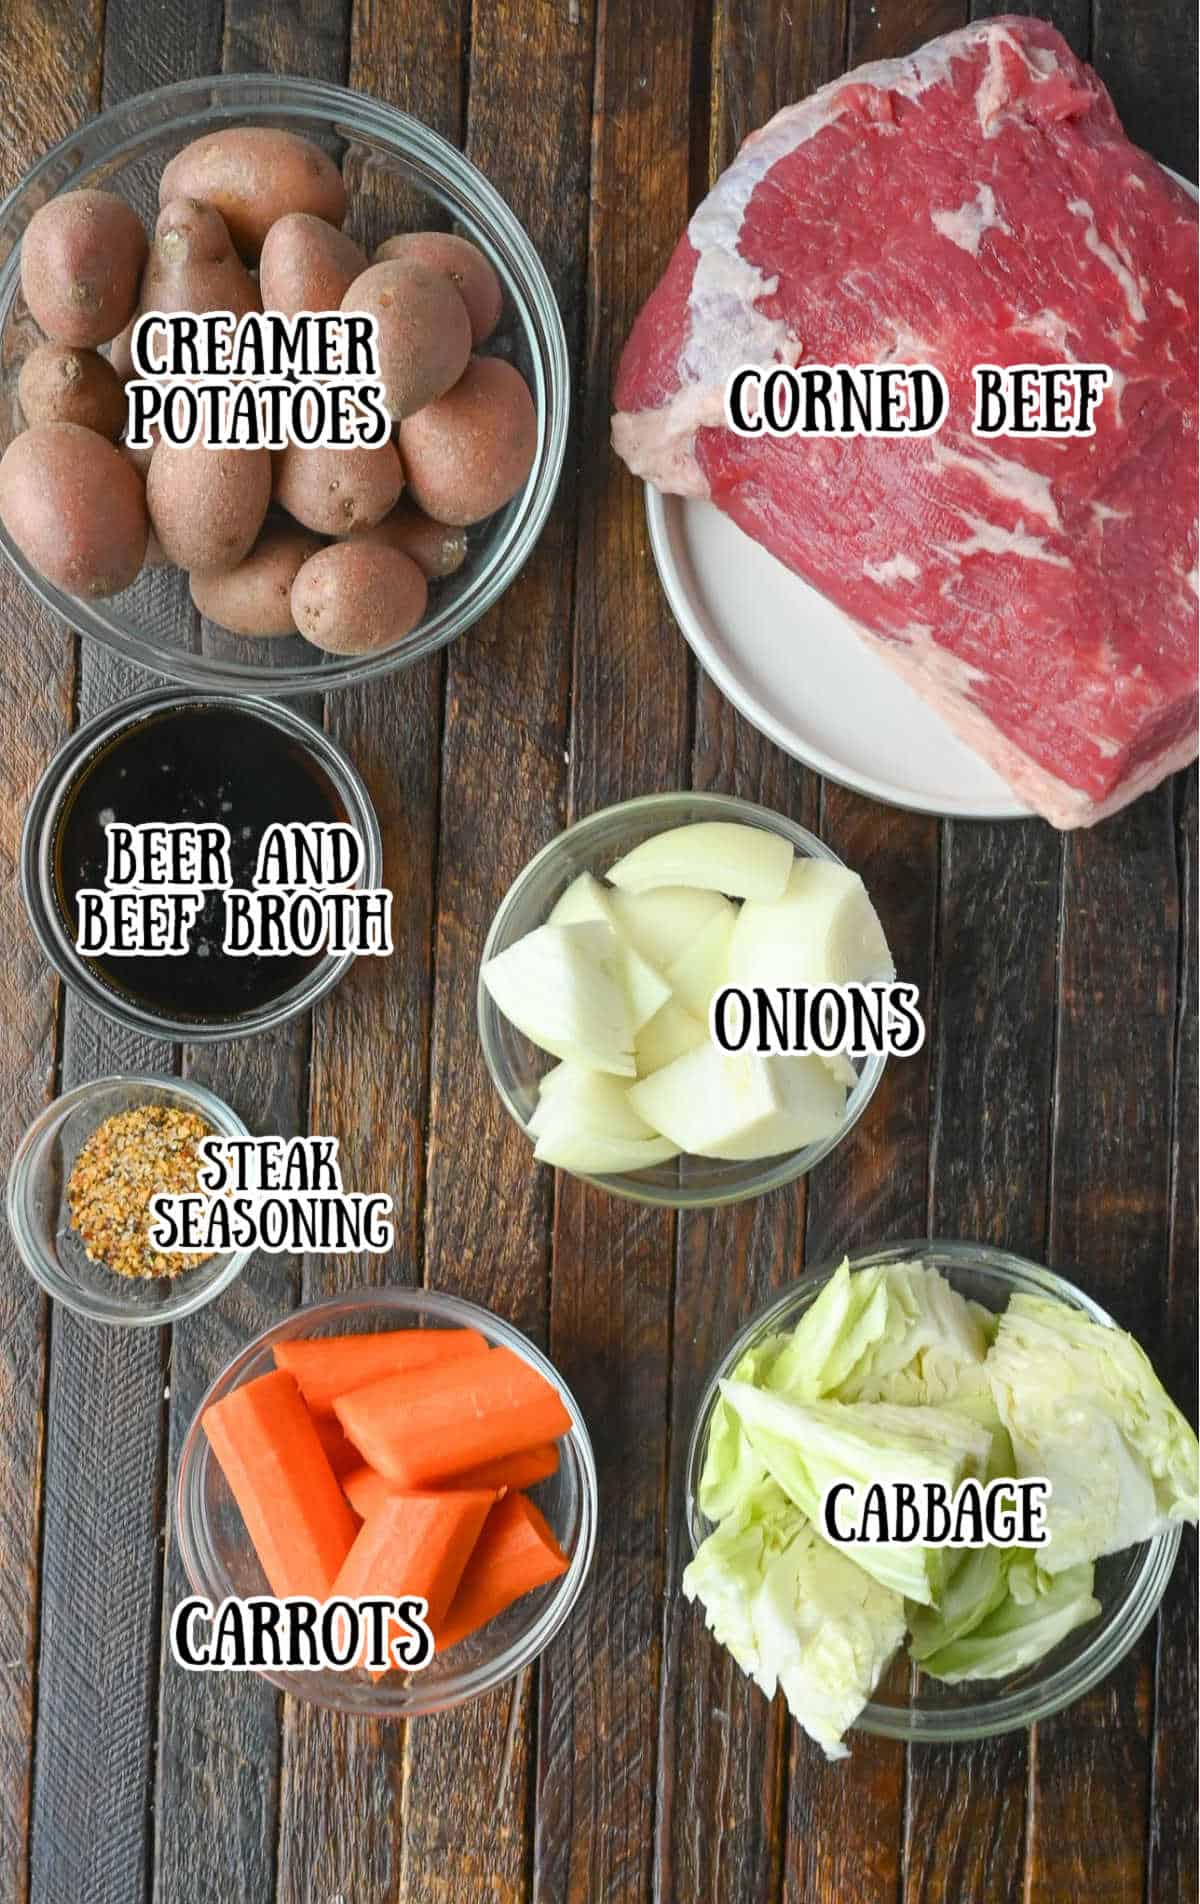 All the ingredients needed for the corned beef and potatoes recipe.